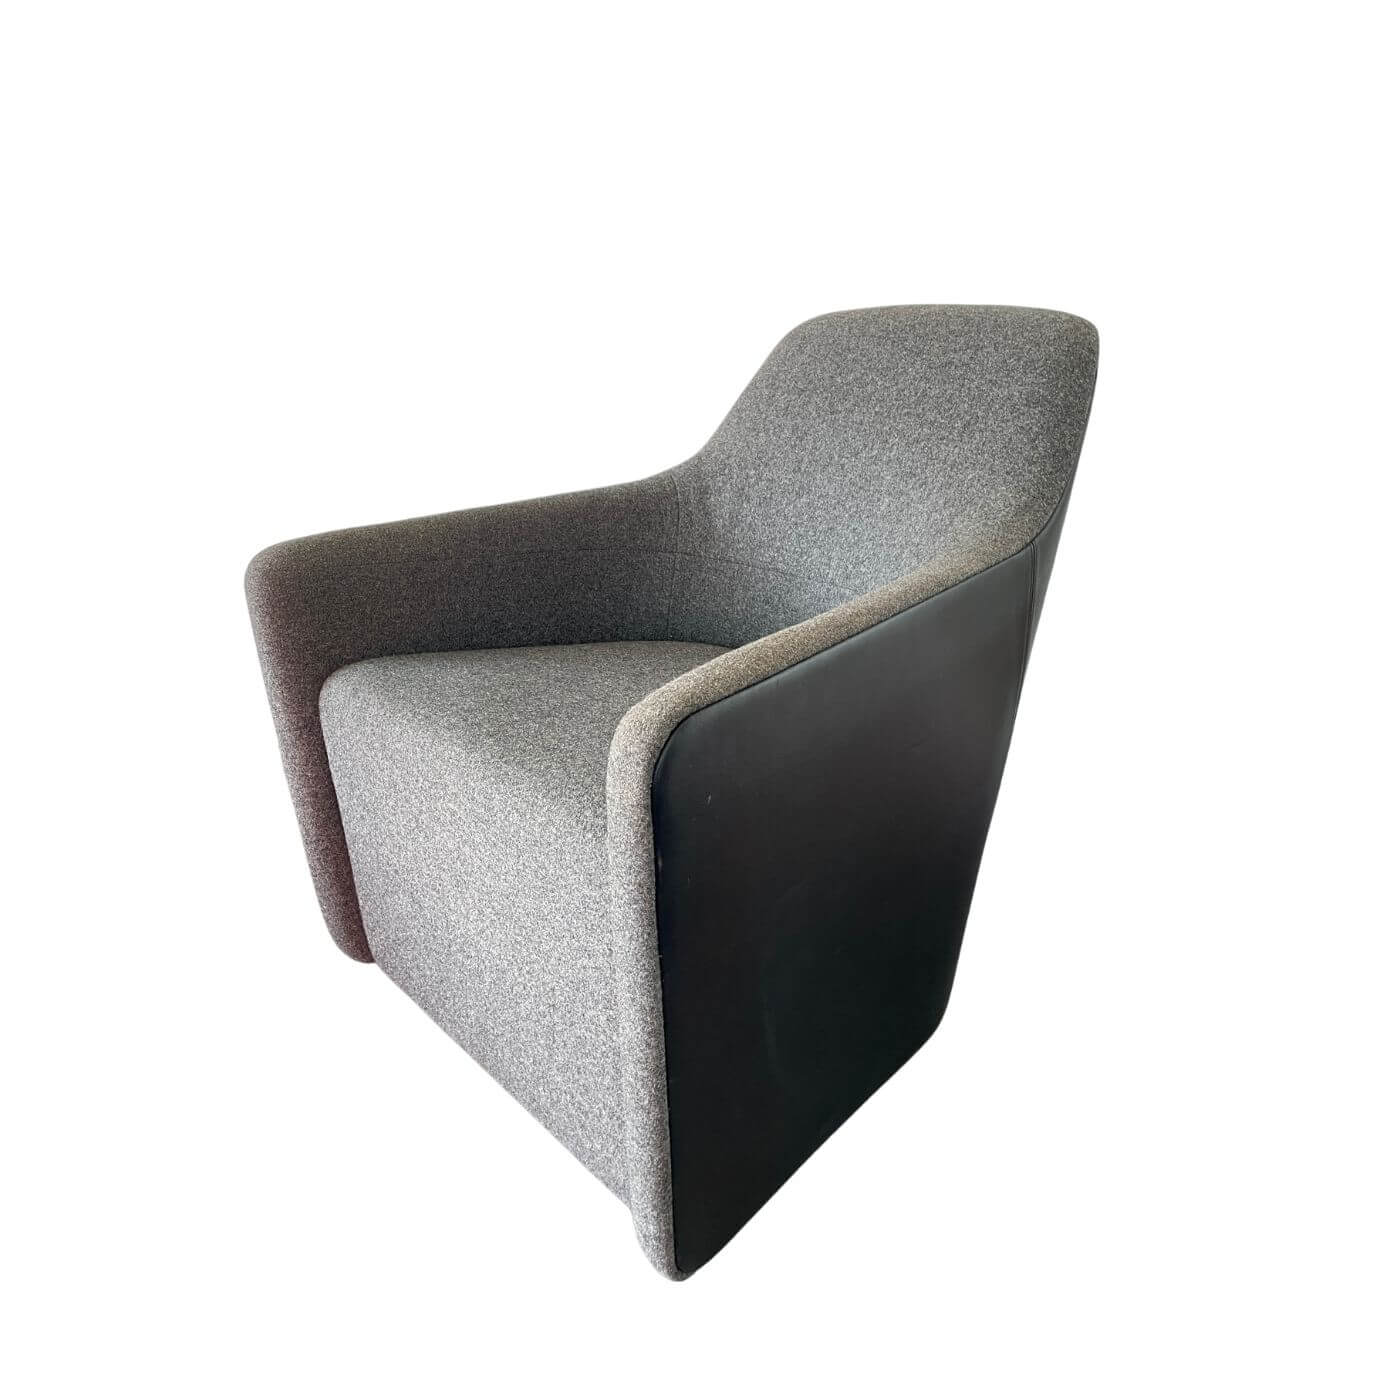 Walter Knoll Foster 520 armchair by Foster + Partners